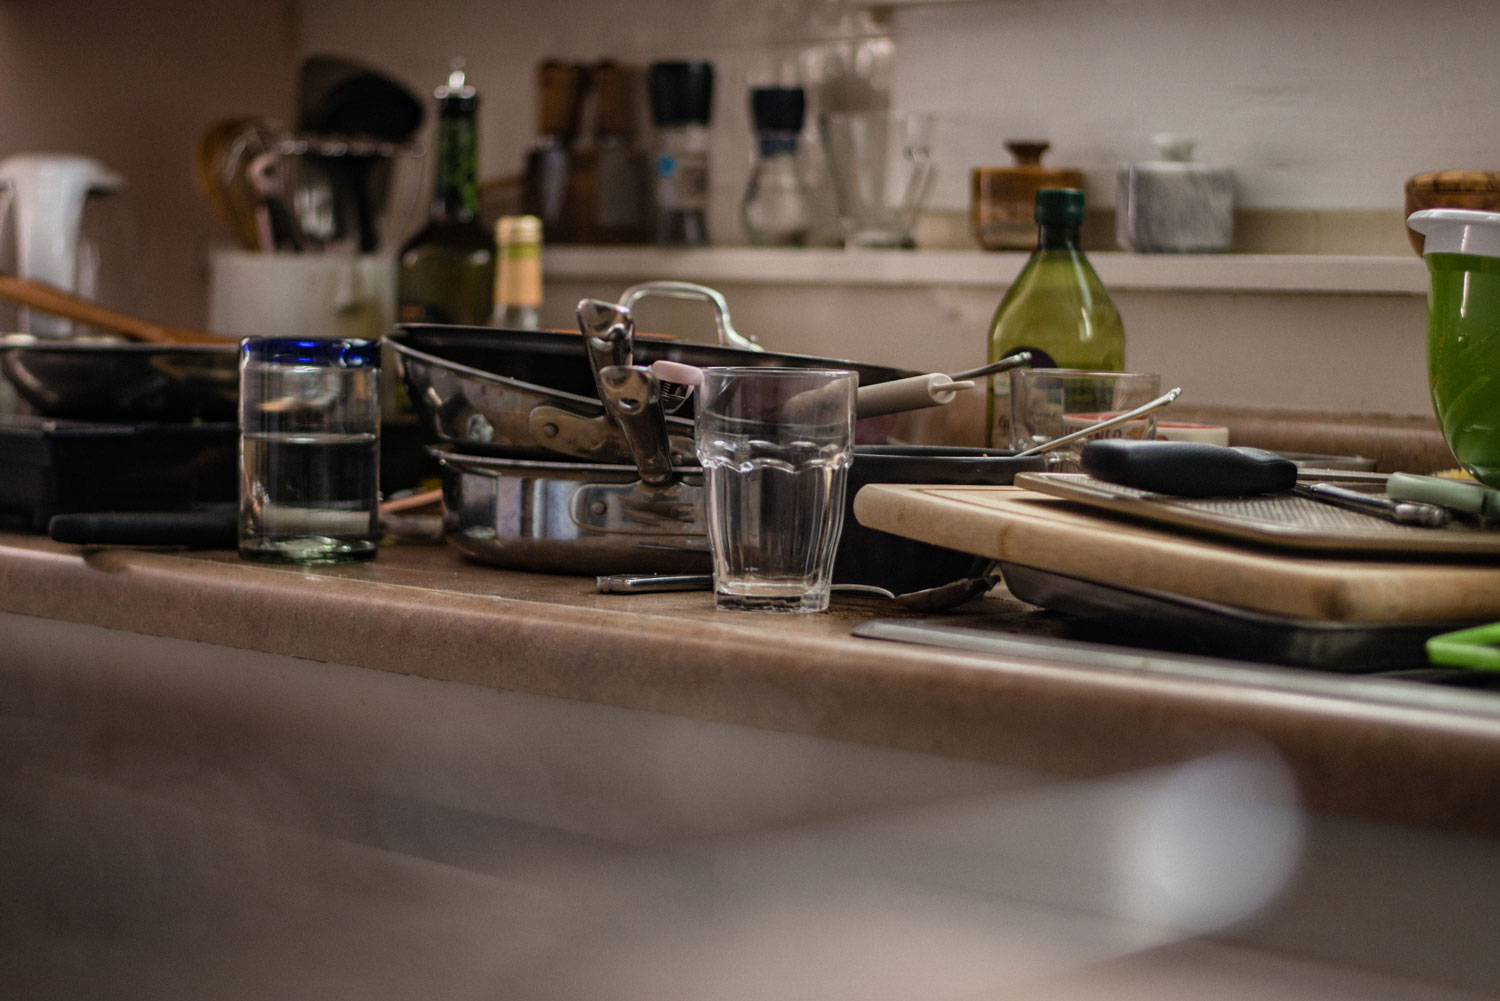 A messy counter and sink is filled to the brim with dirty dishes and cluttered with bowls, pans, and utensils that need washing.